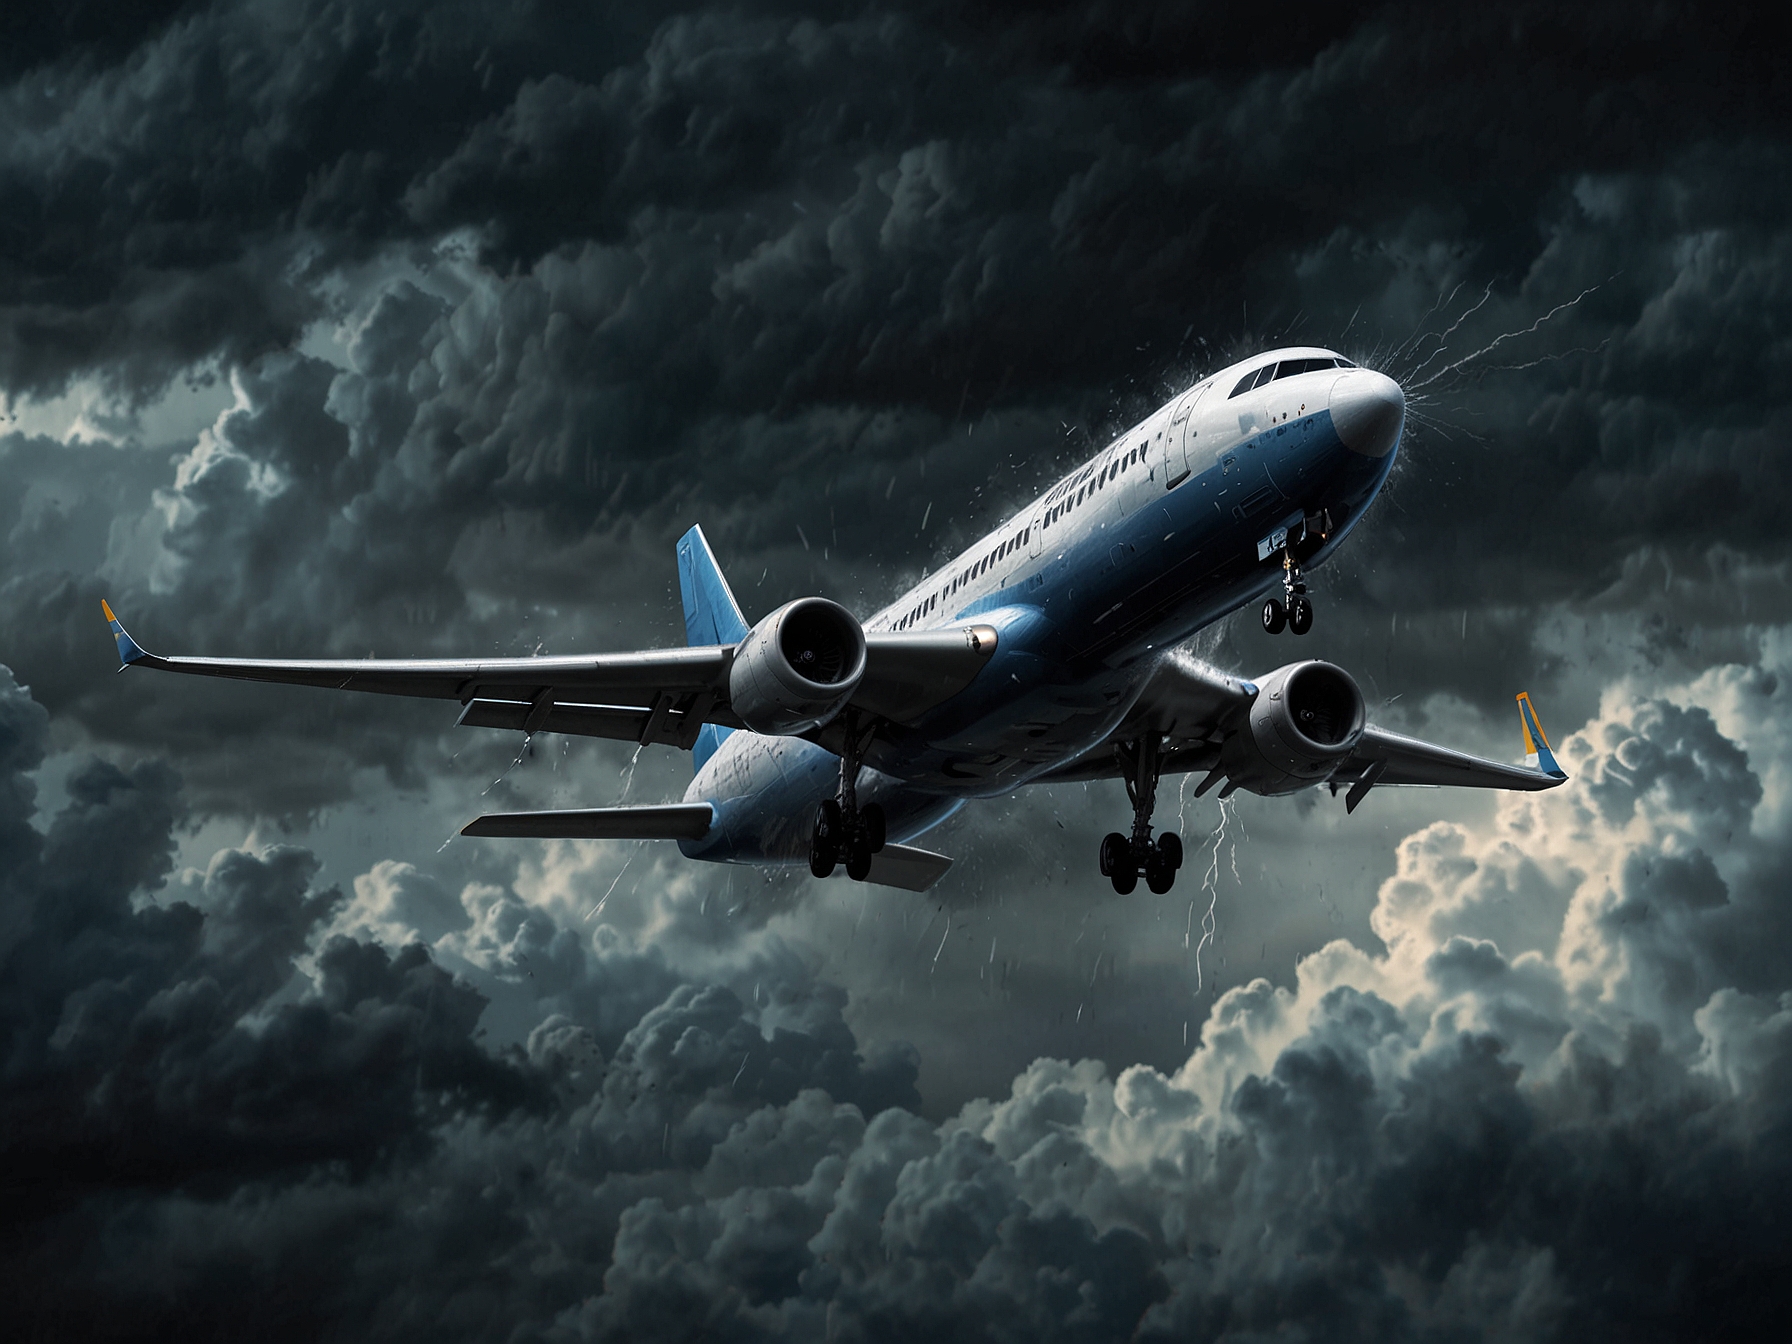 An image depicting a commercial airplane flying through stormy weather, symbolizing the importance of weather conditions in affecting flight schedules and prioritizing passenger safety.